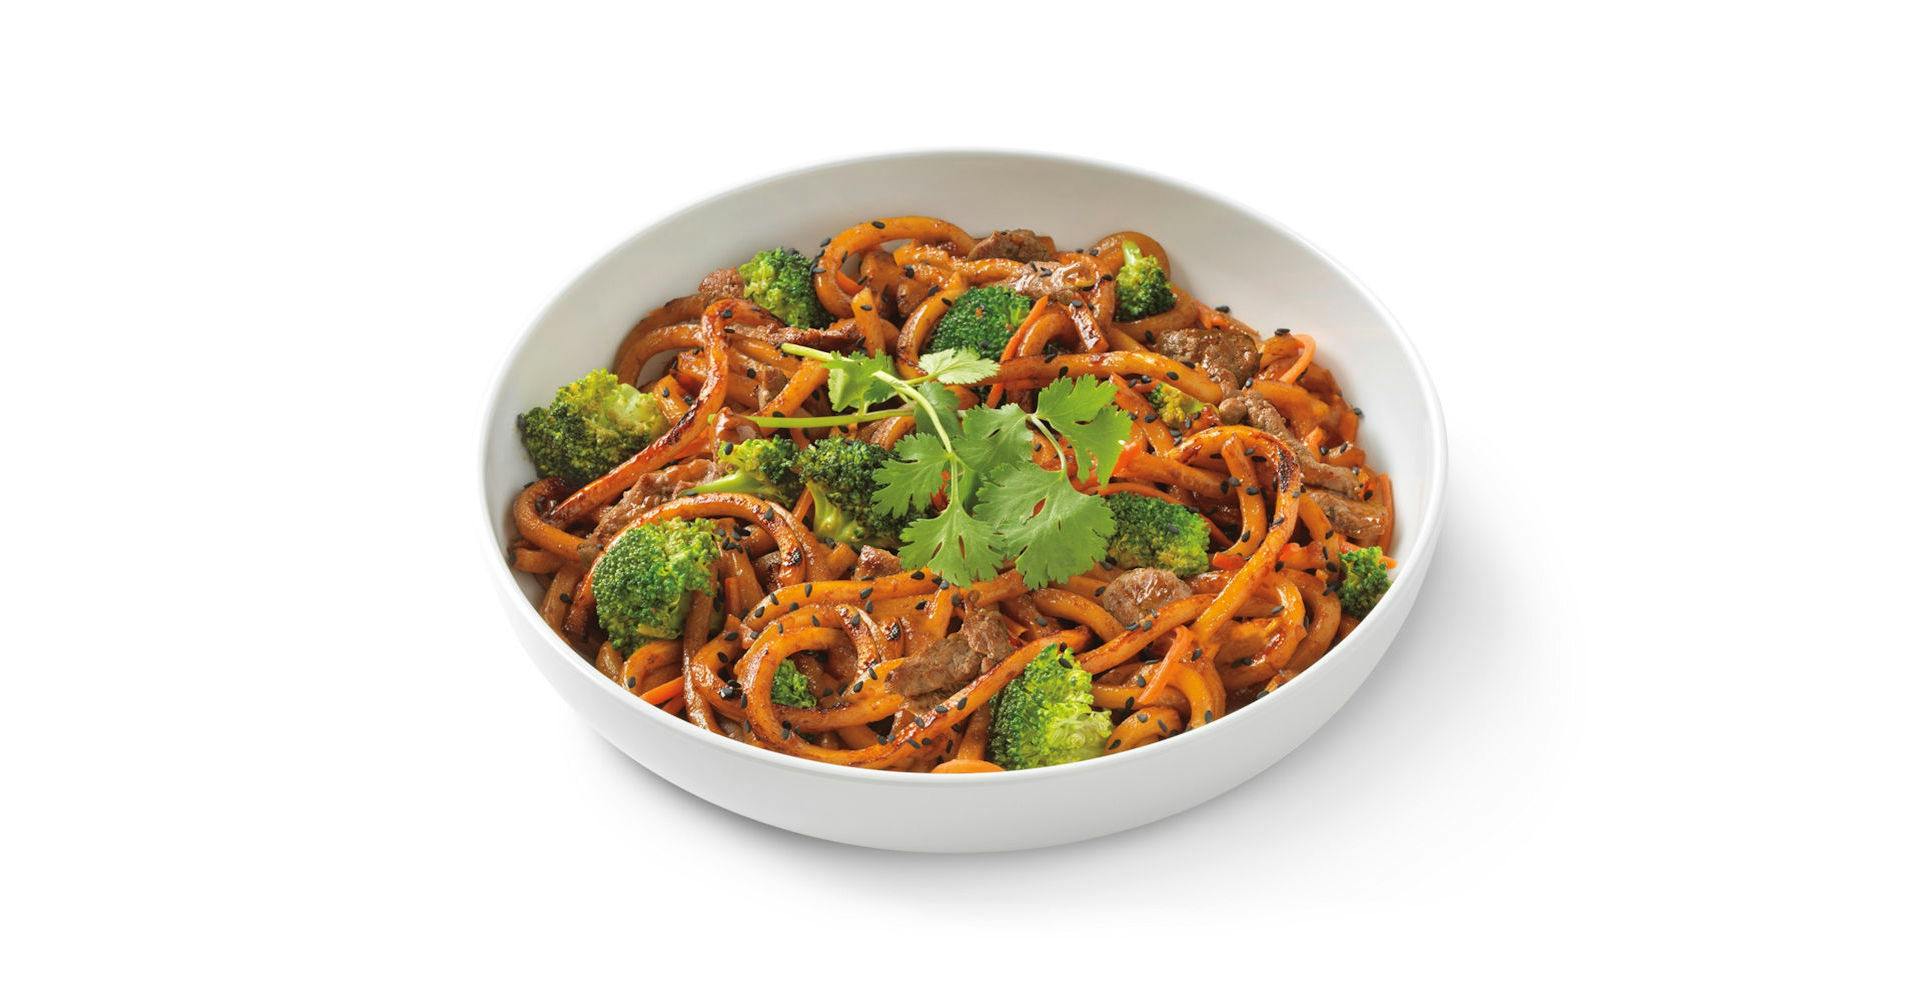 Japanese Pan Noodles with Marinated Steak from Noodles & Company - Madison East Towne in Madison, WI